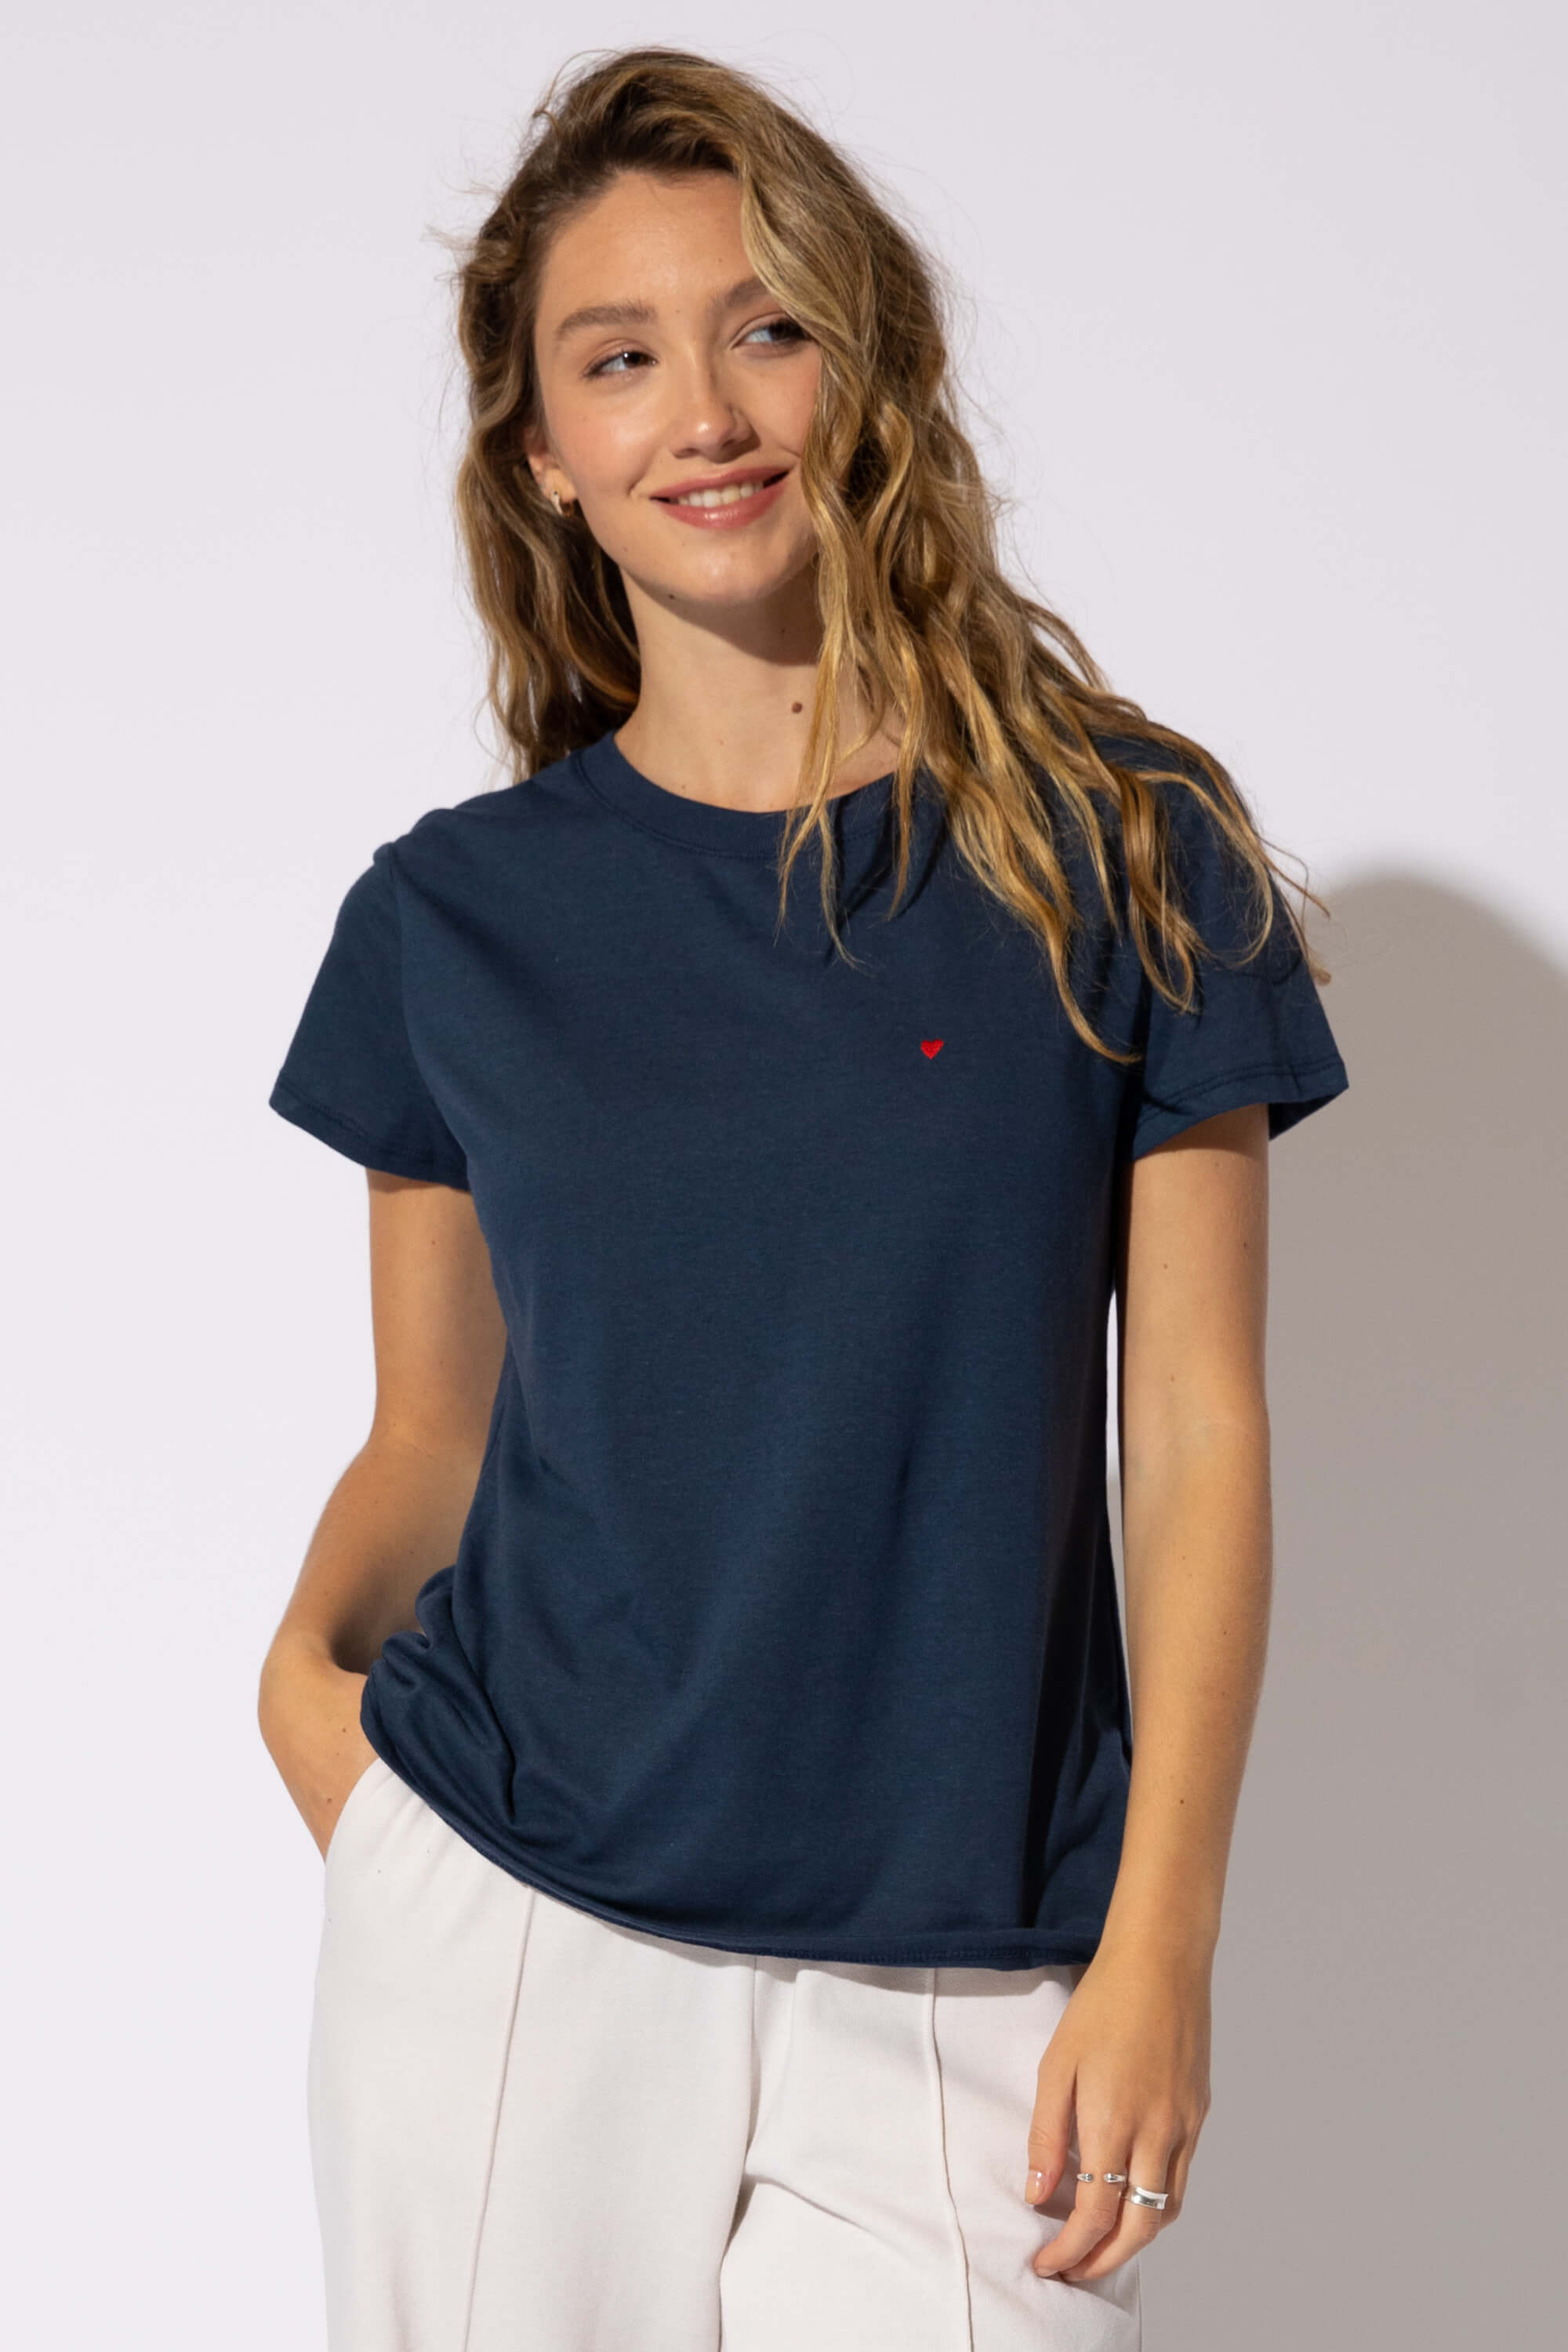 navy short sleeve top with red heart